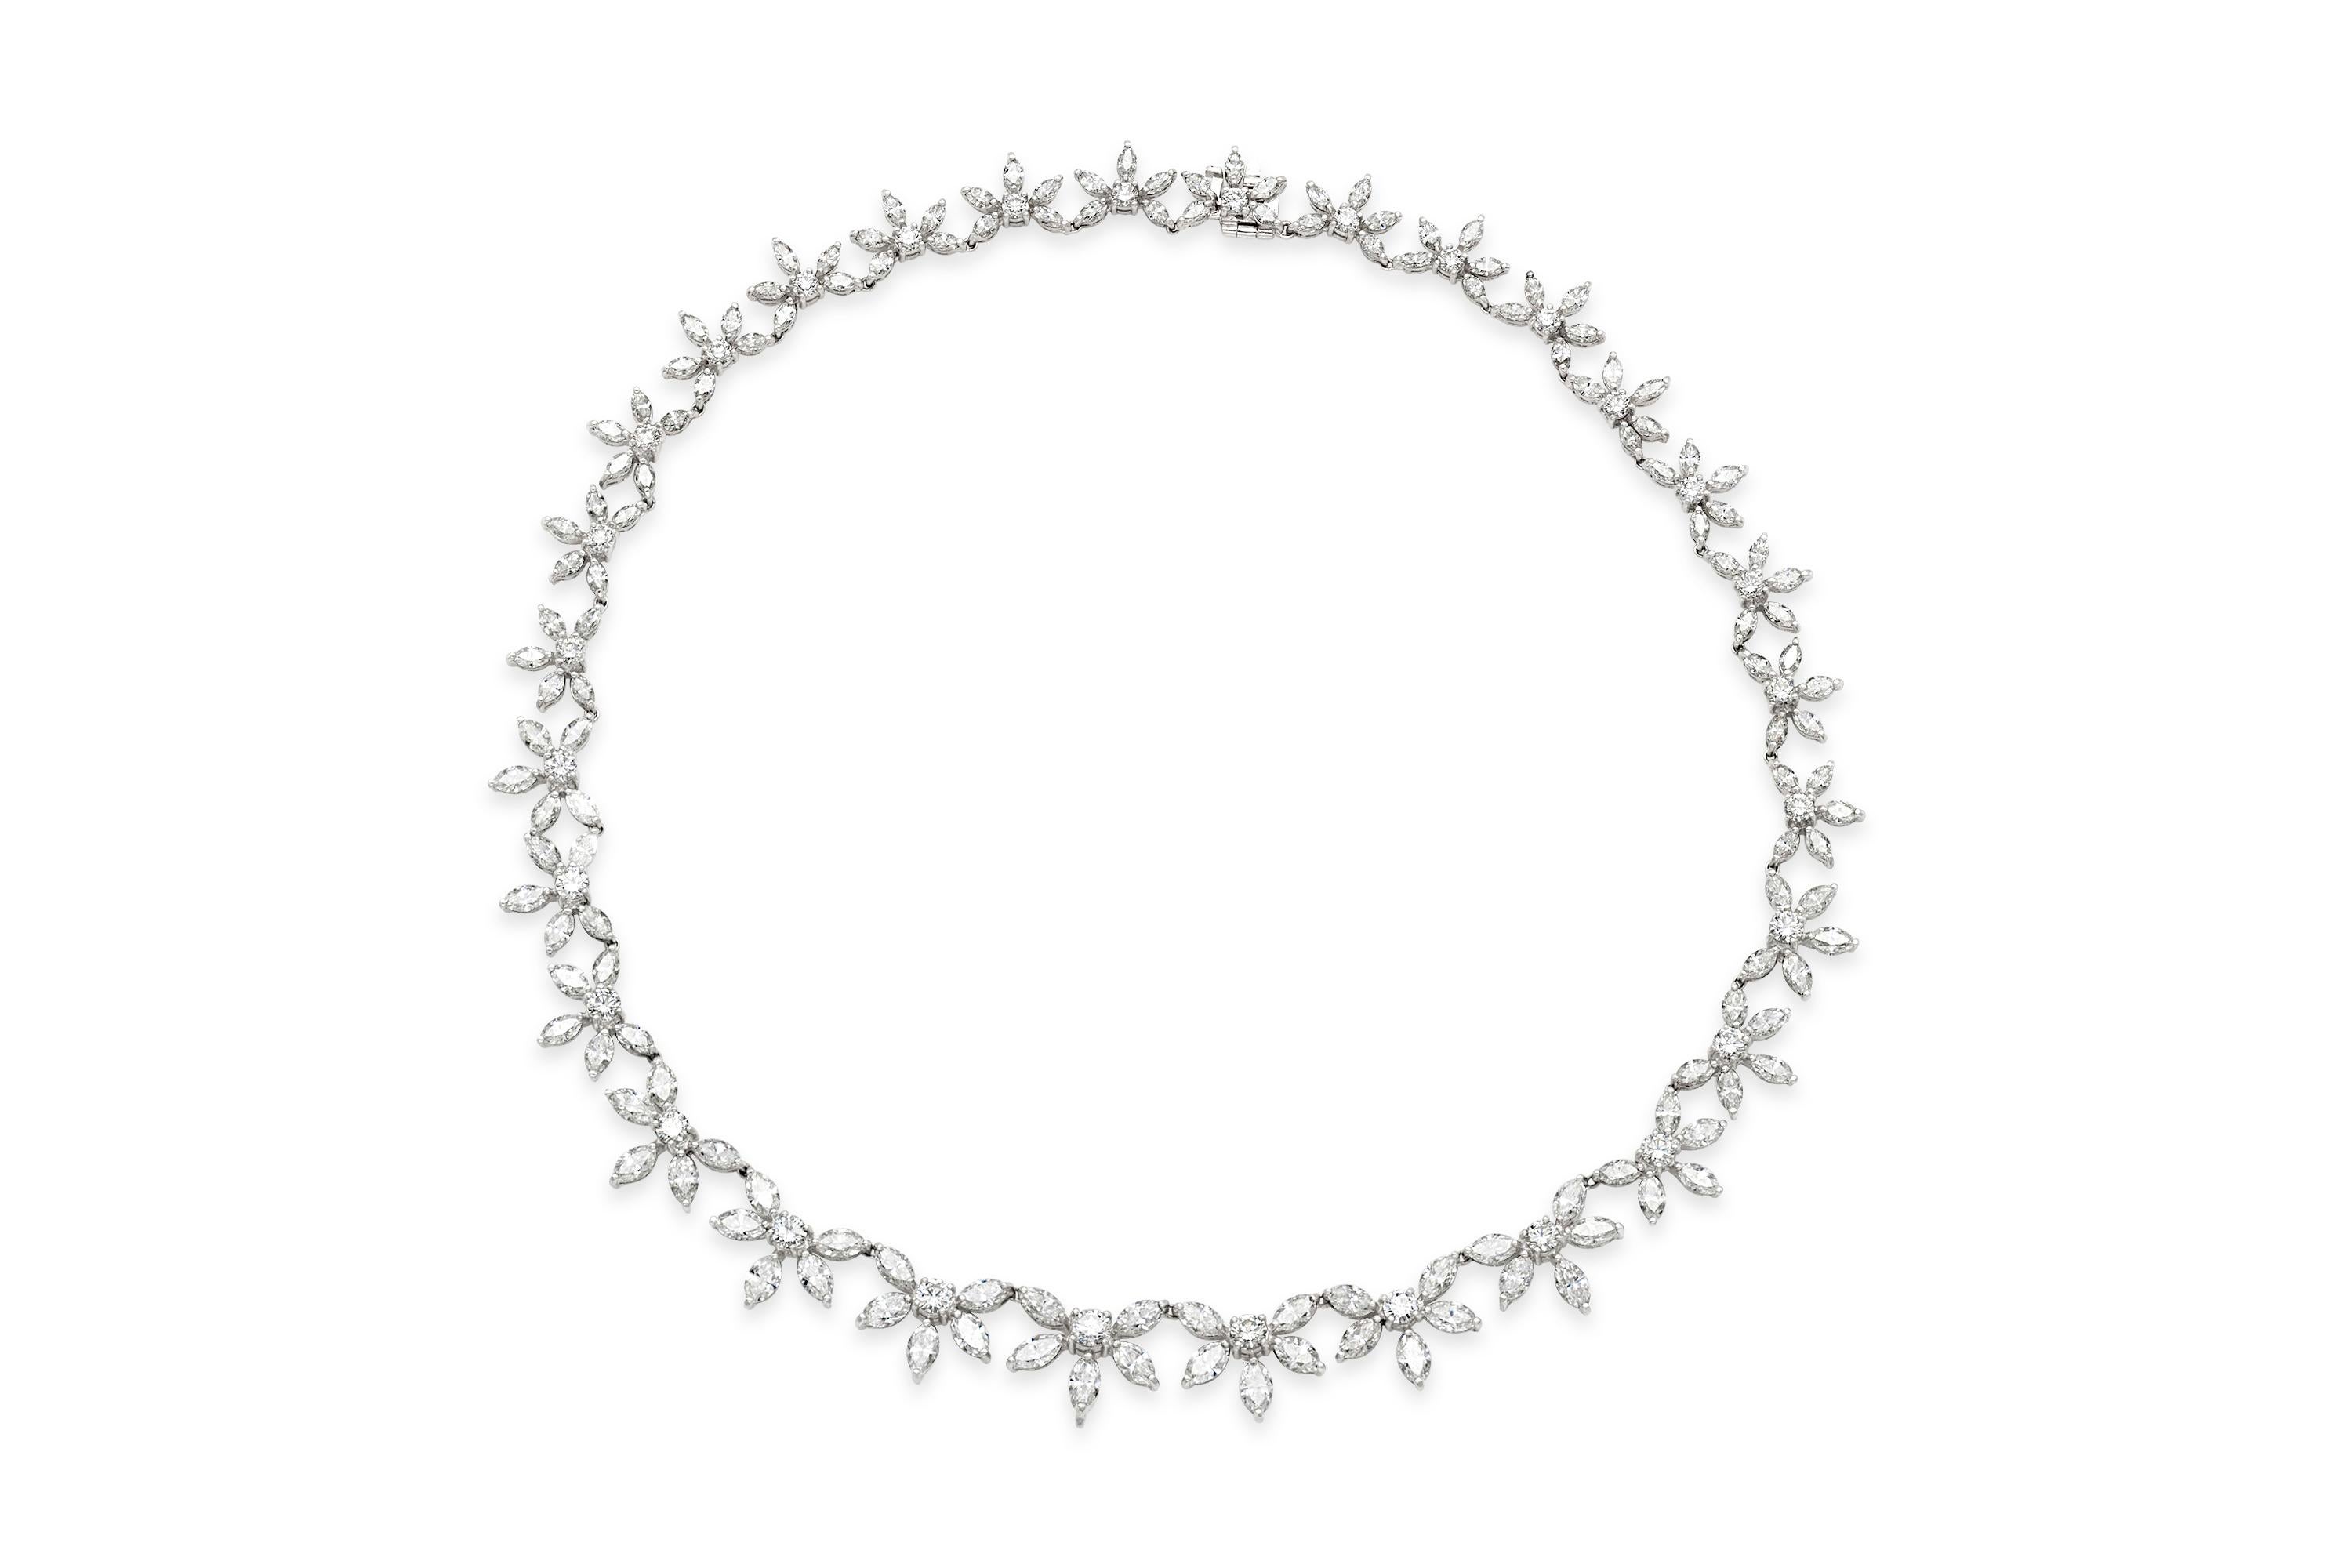 Finely crafted in platinum with Roud Brilliant and Marquise cut diamonds weighing approximately a total of 35.10 carats.
Circa 1950s